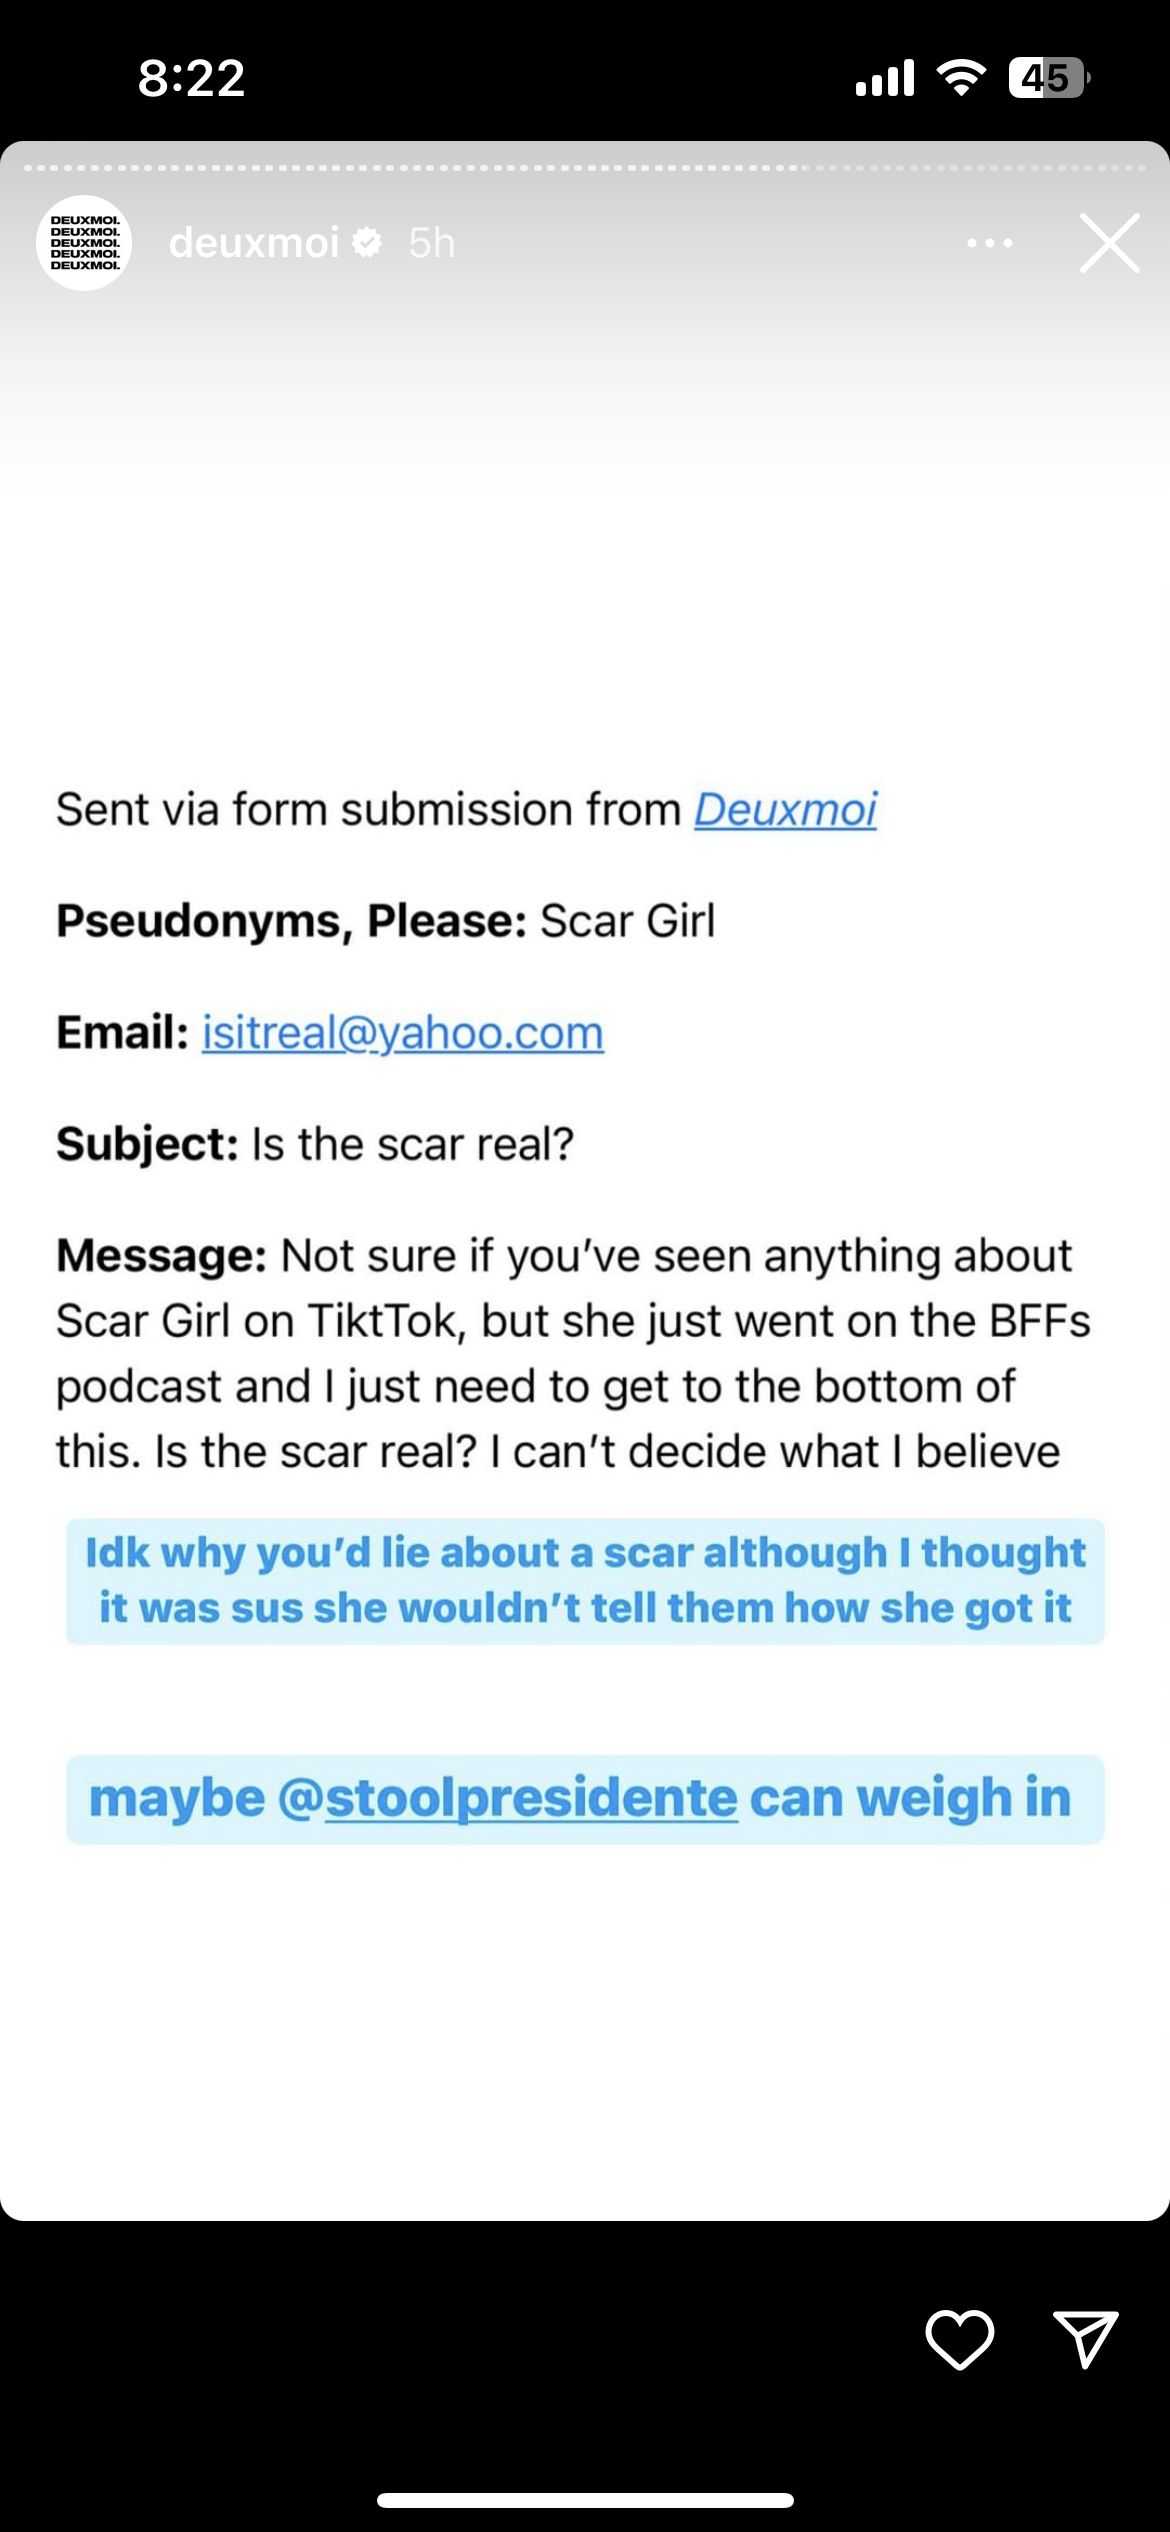 Deuxmoi addressed the controversies behind Scar Girl's scar. 